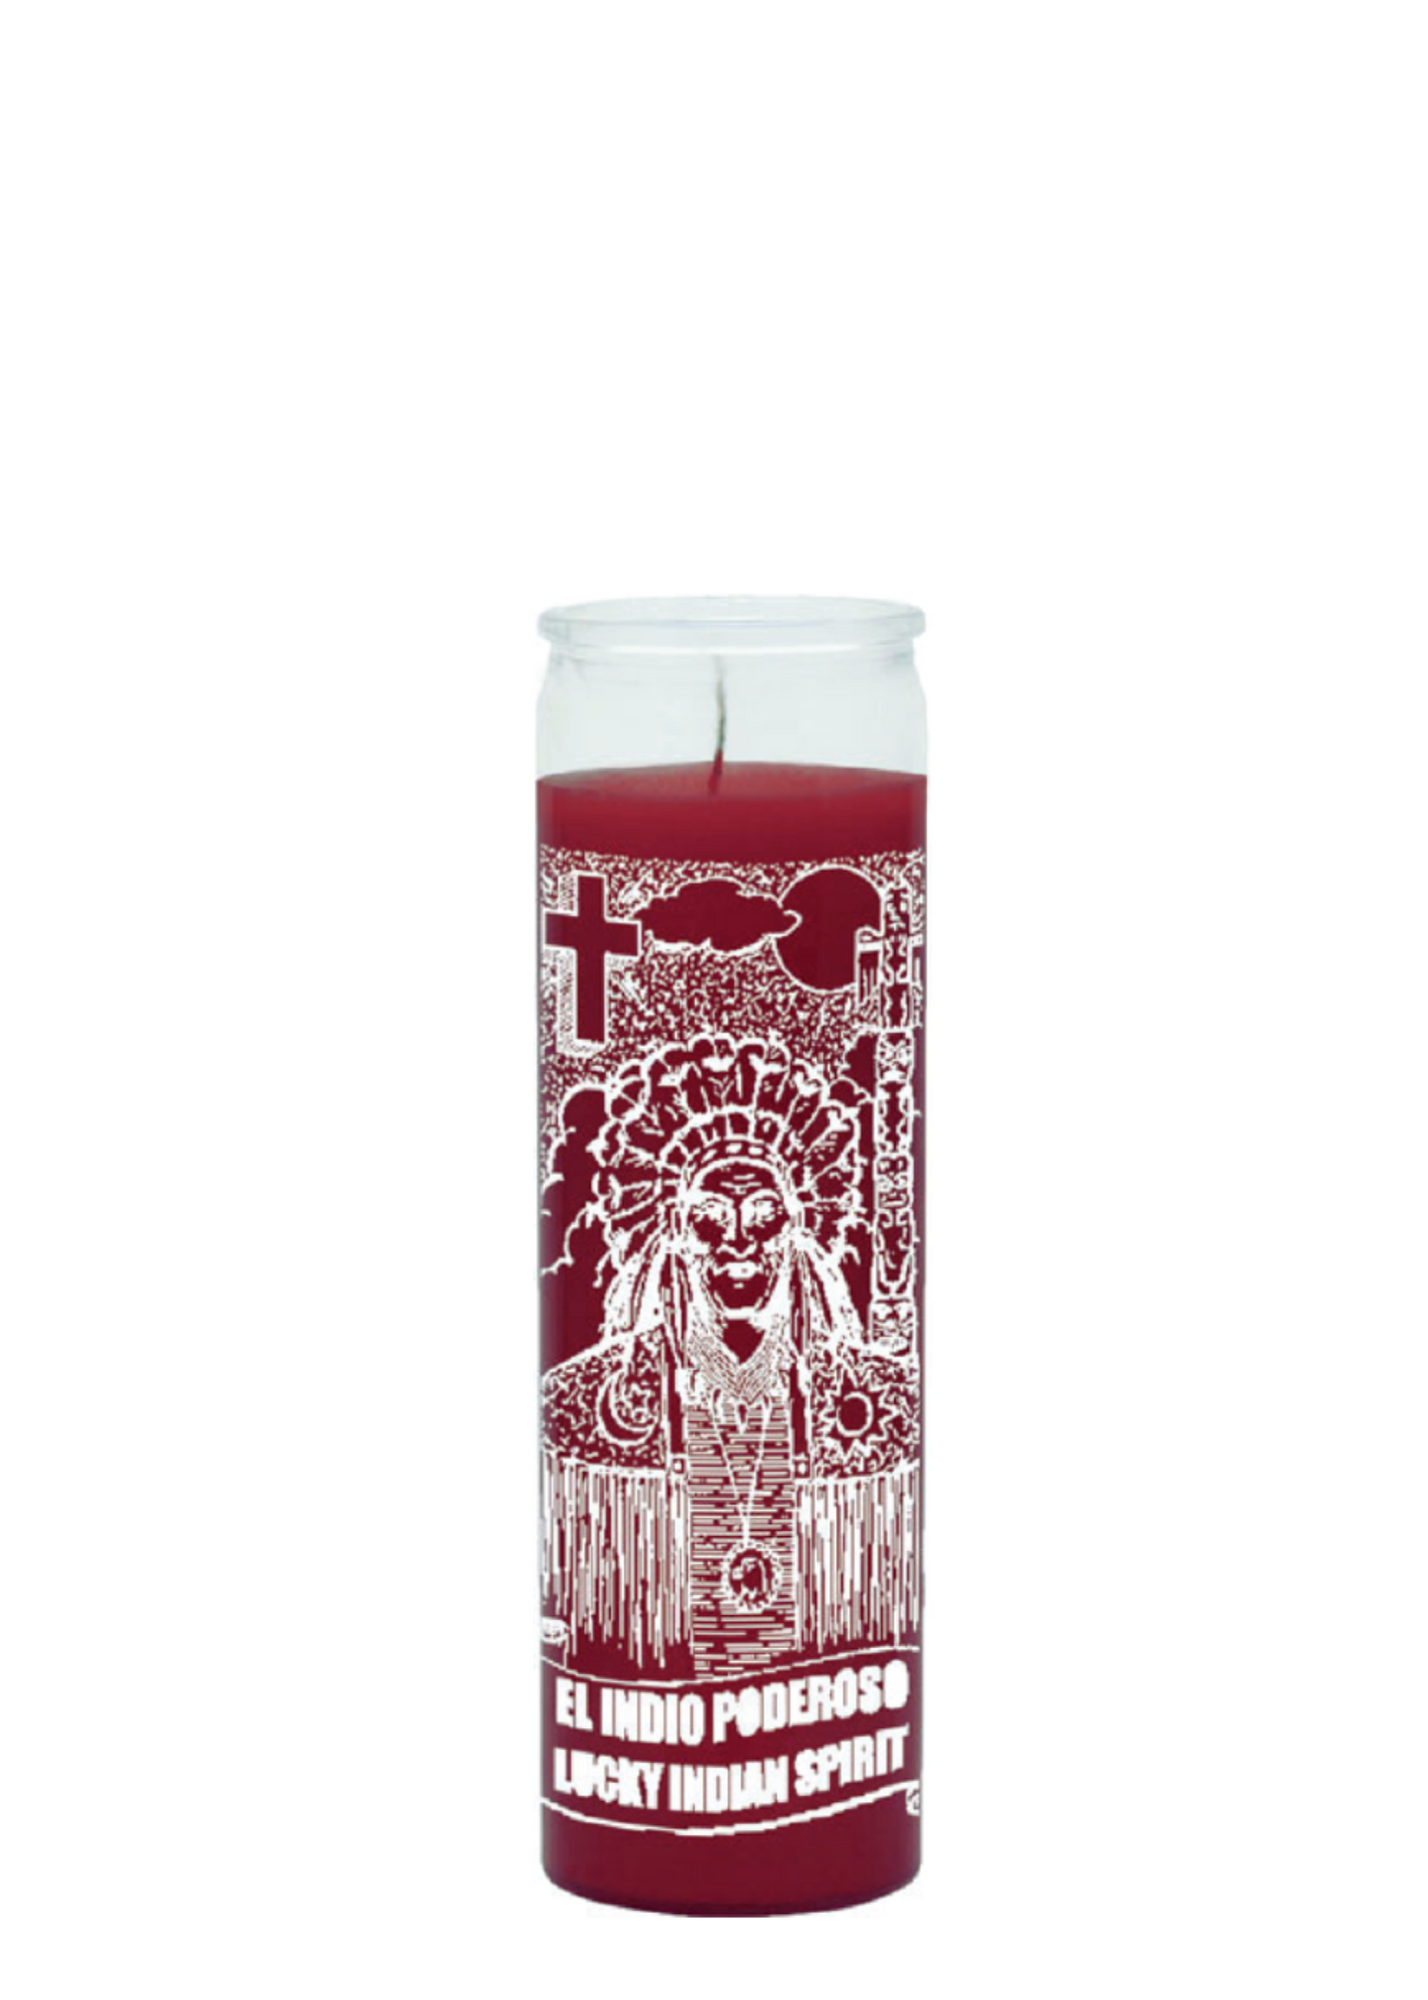 Indian spirit 1 color (red) 7 day candle